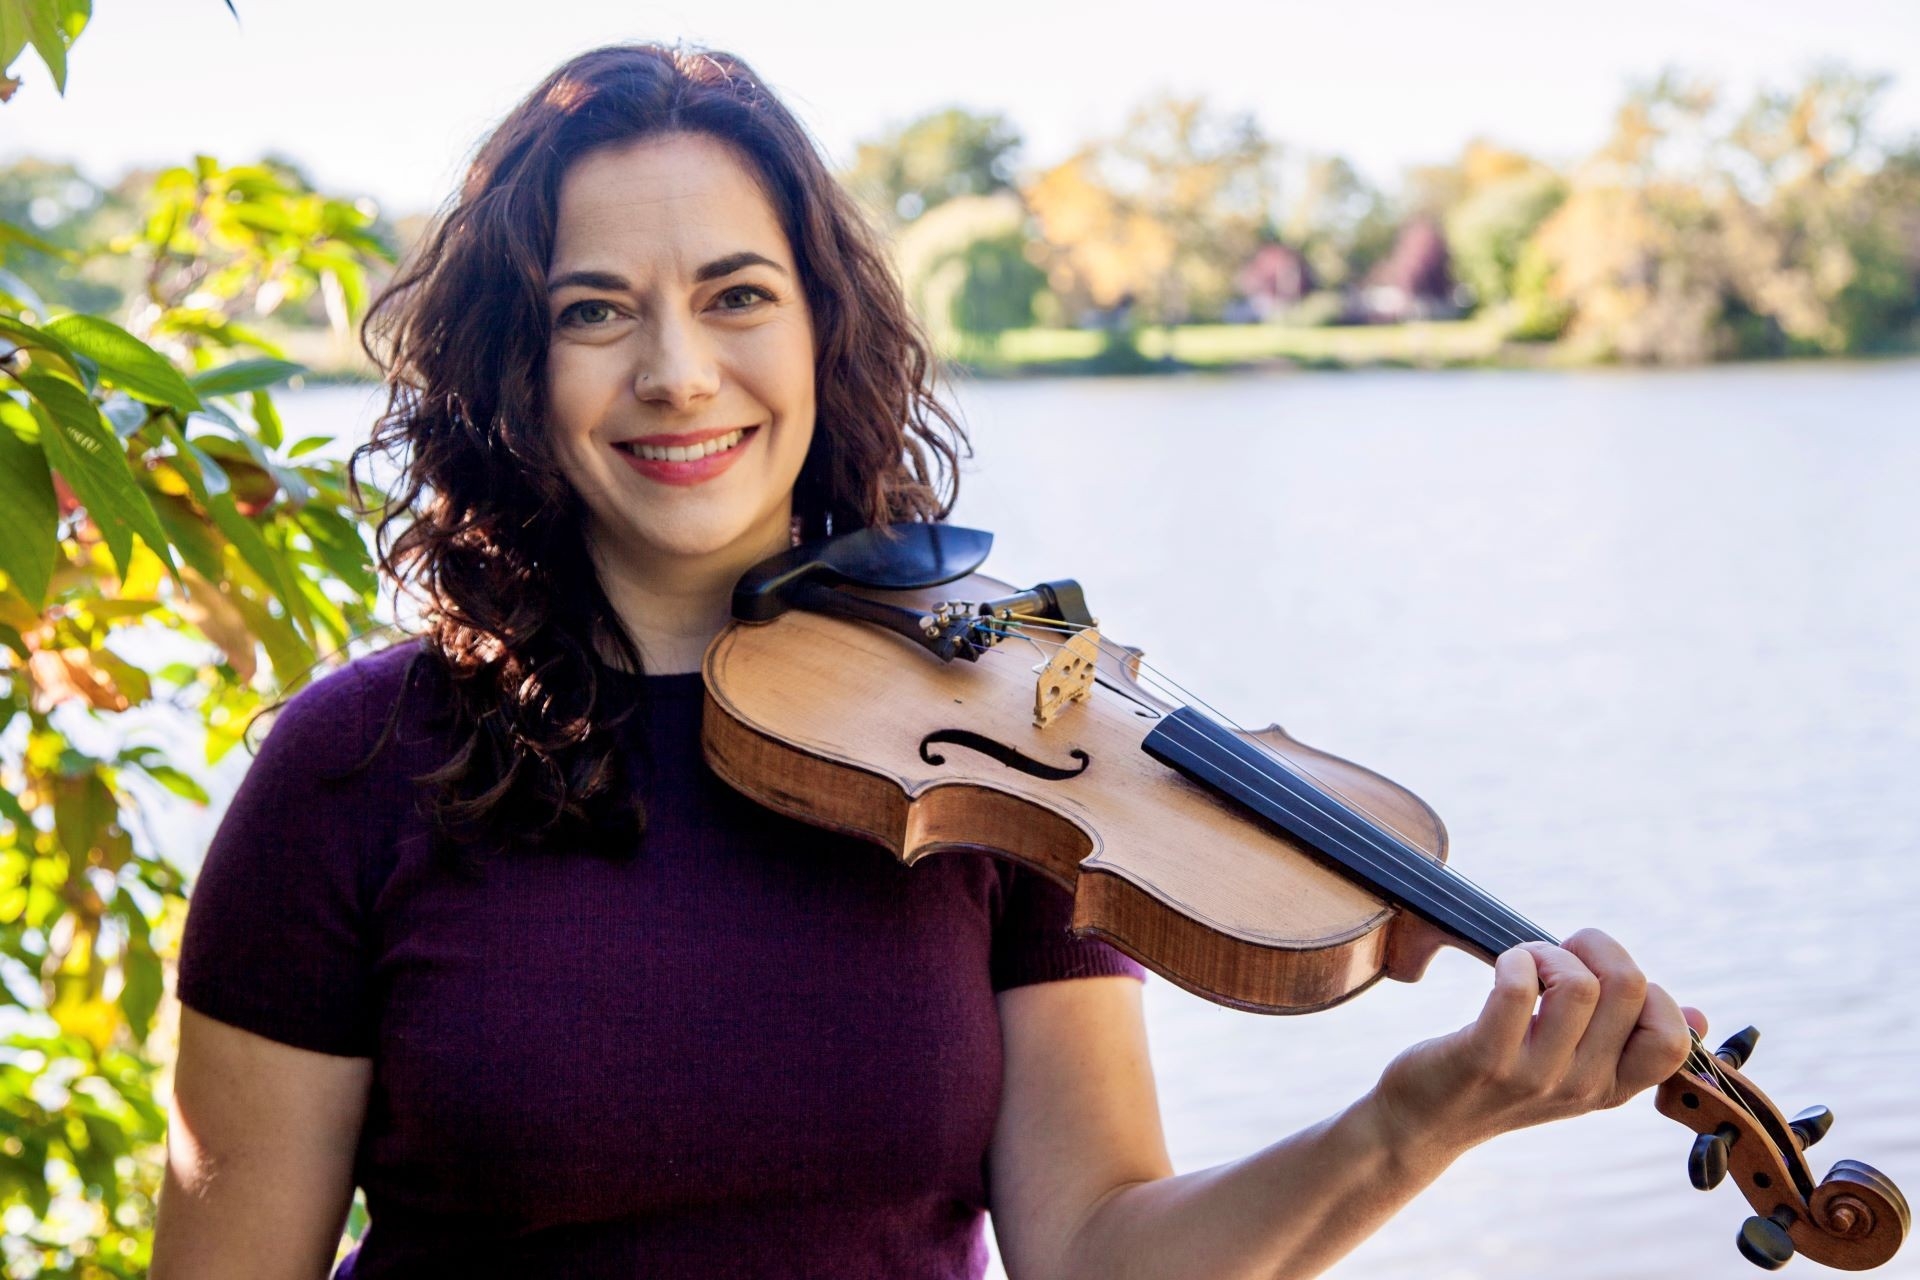 A smiling woman in an outdoor setting, holding a violin.